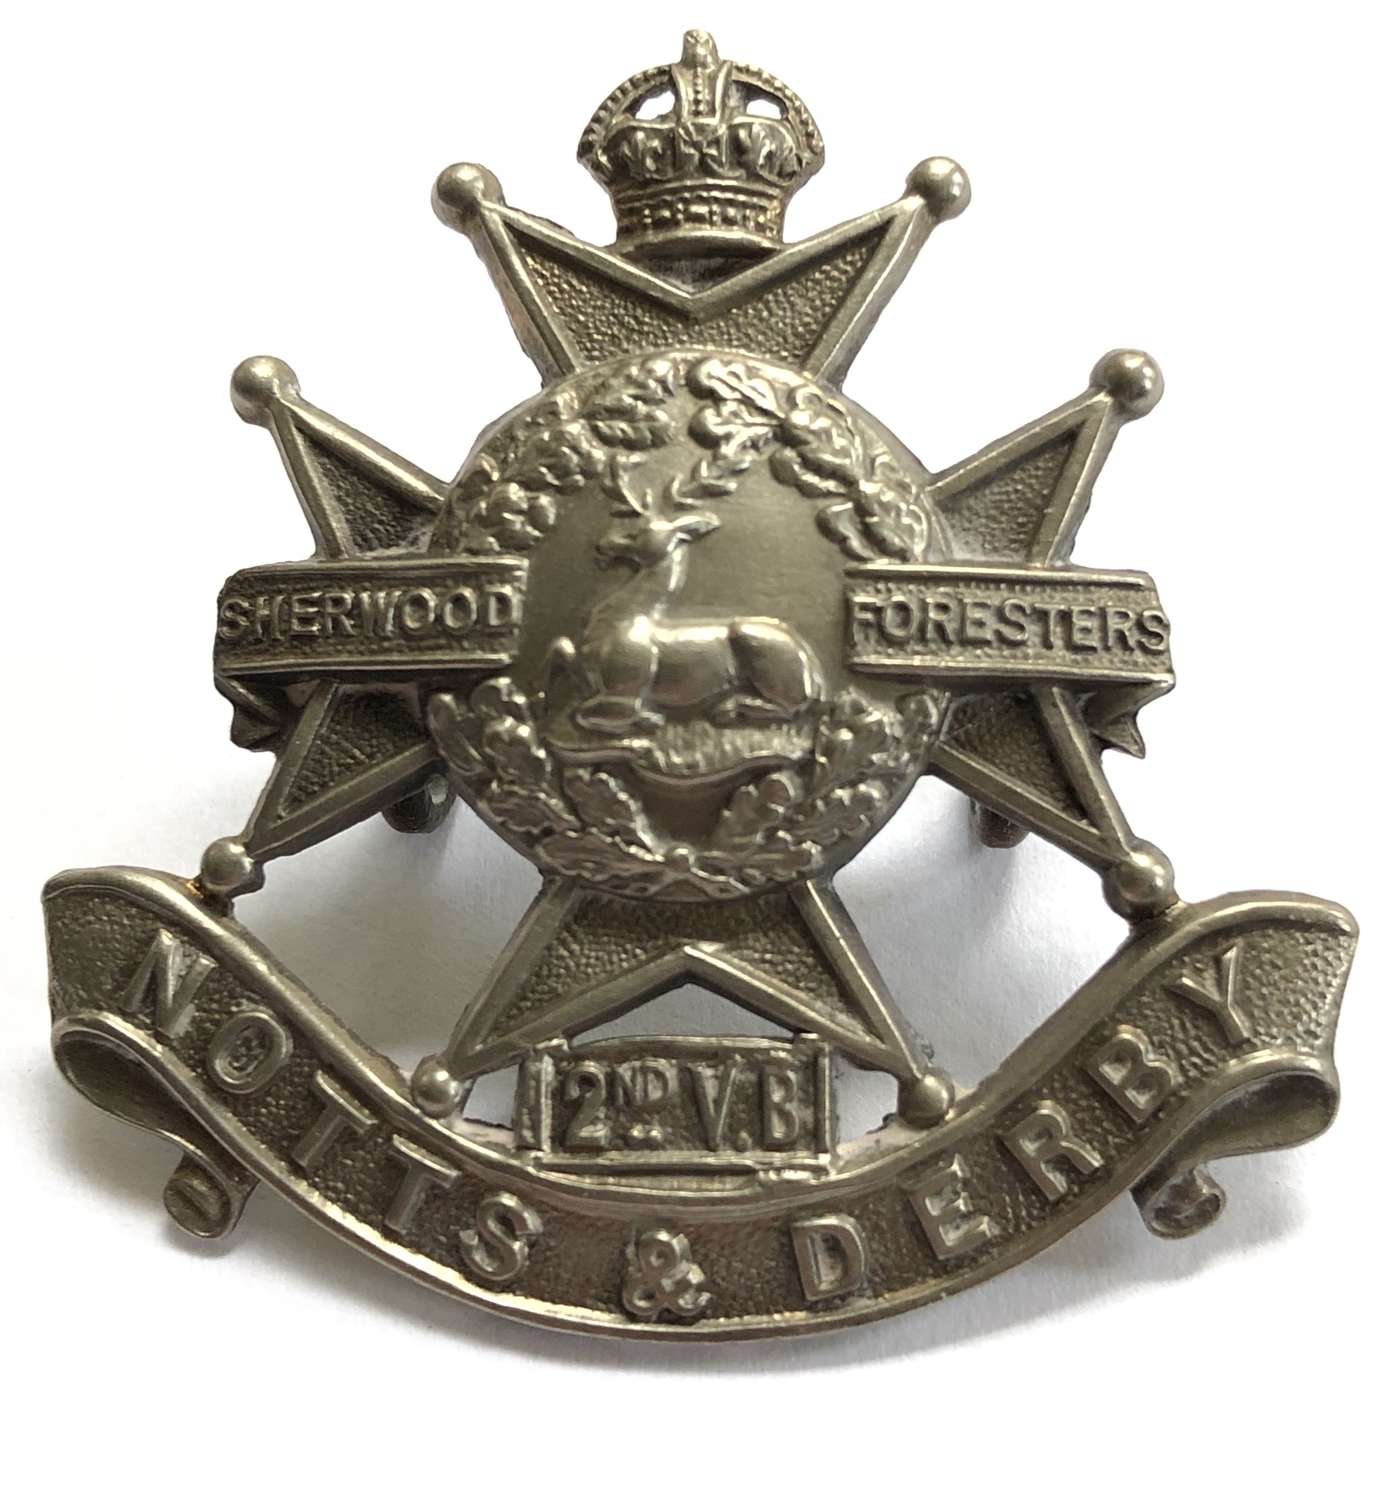 2nd VB Sherwood Foresters (Notts & Derby) OR’s cap badge c1902-08